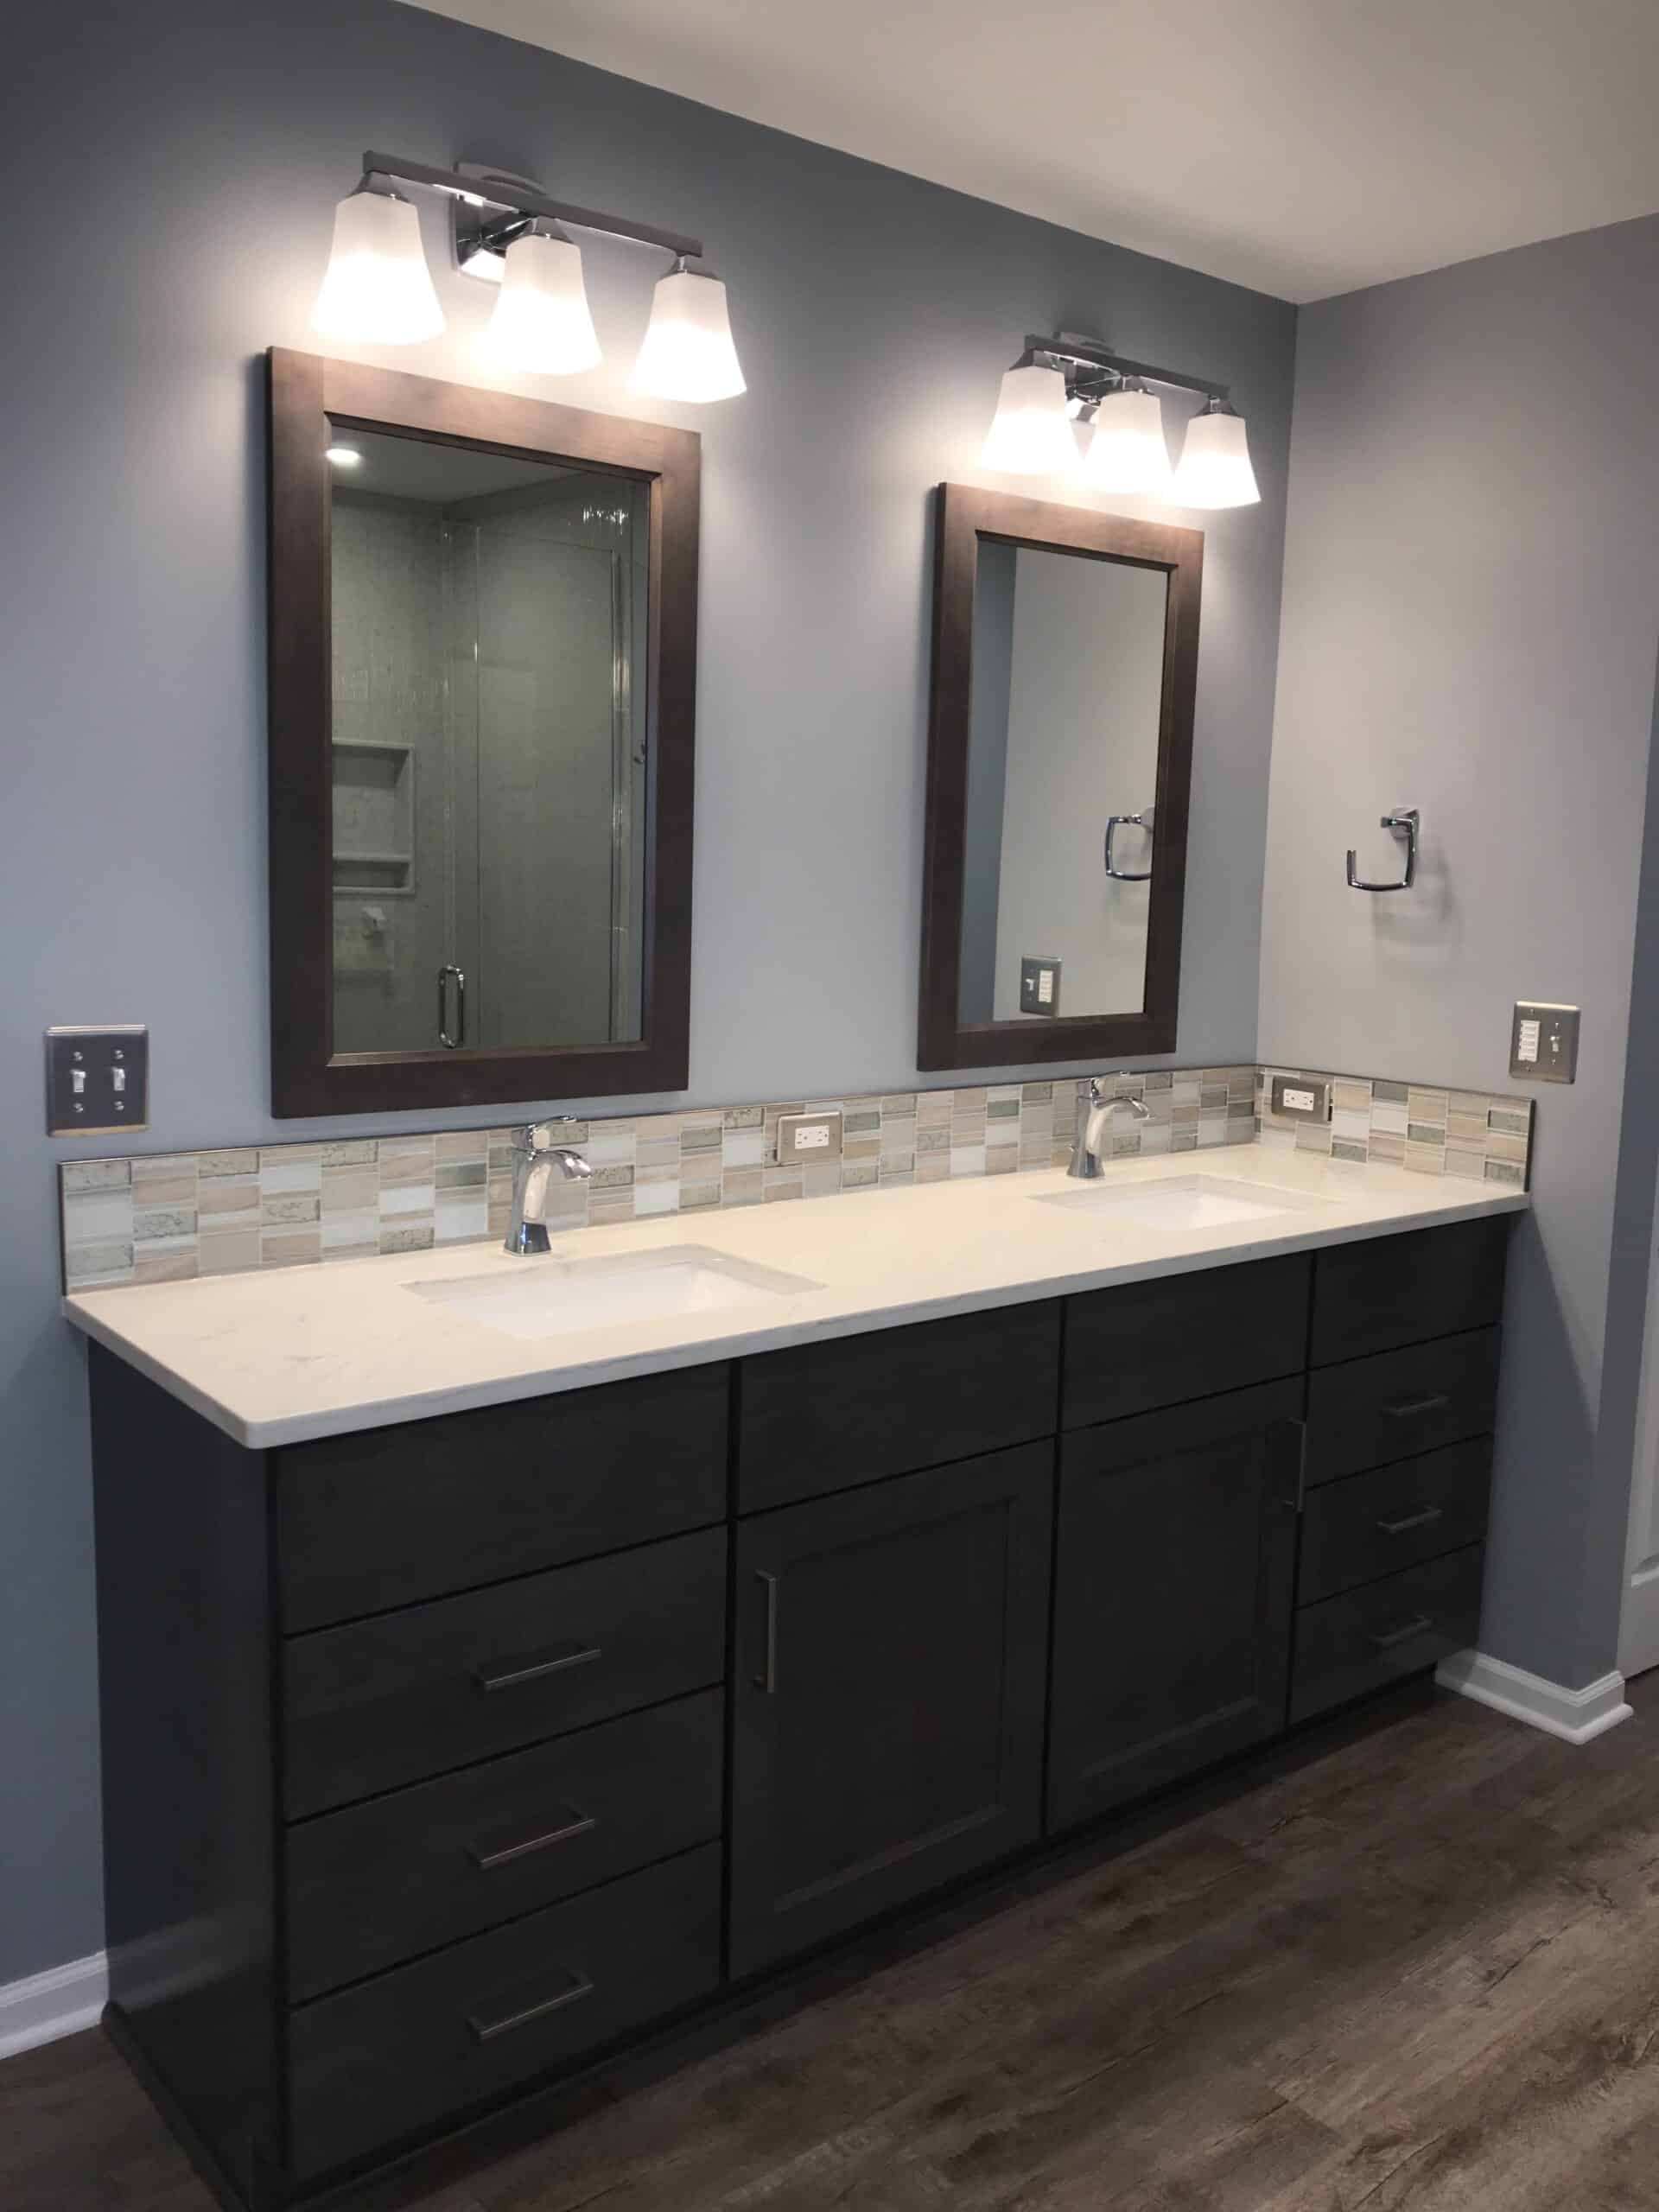 Wulf Master Bath - Schafer Brothers Remodeling Inc.